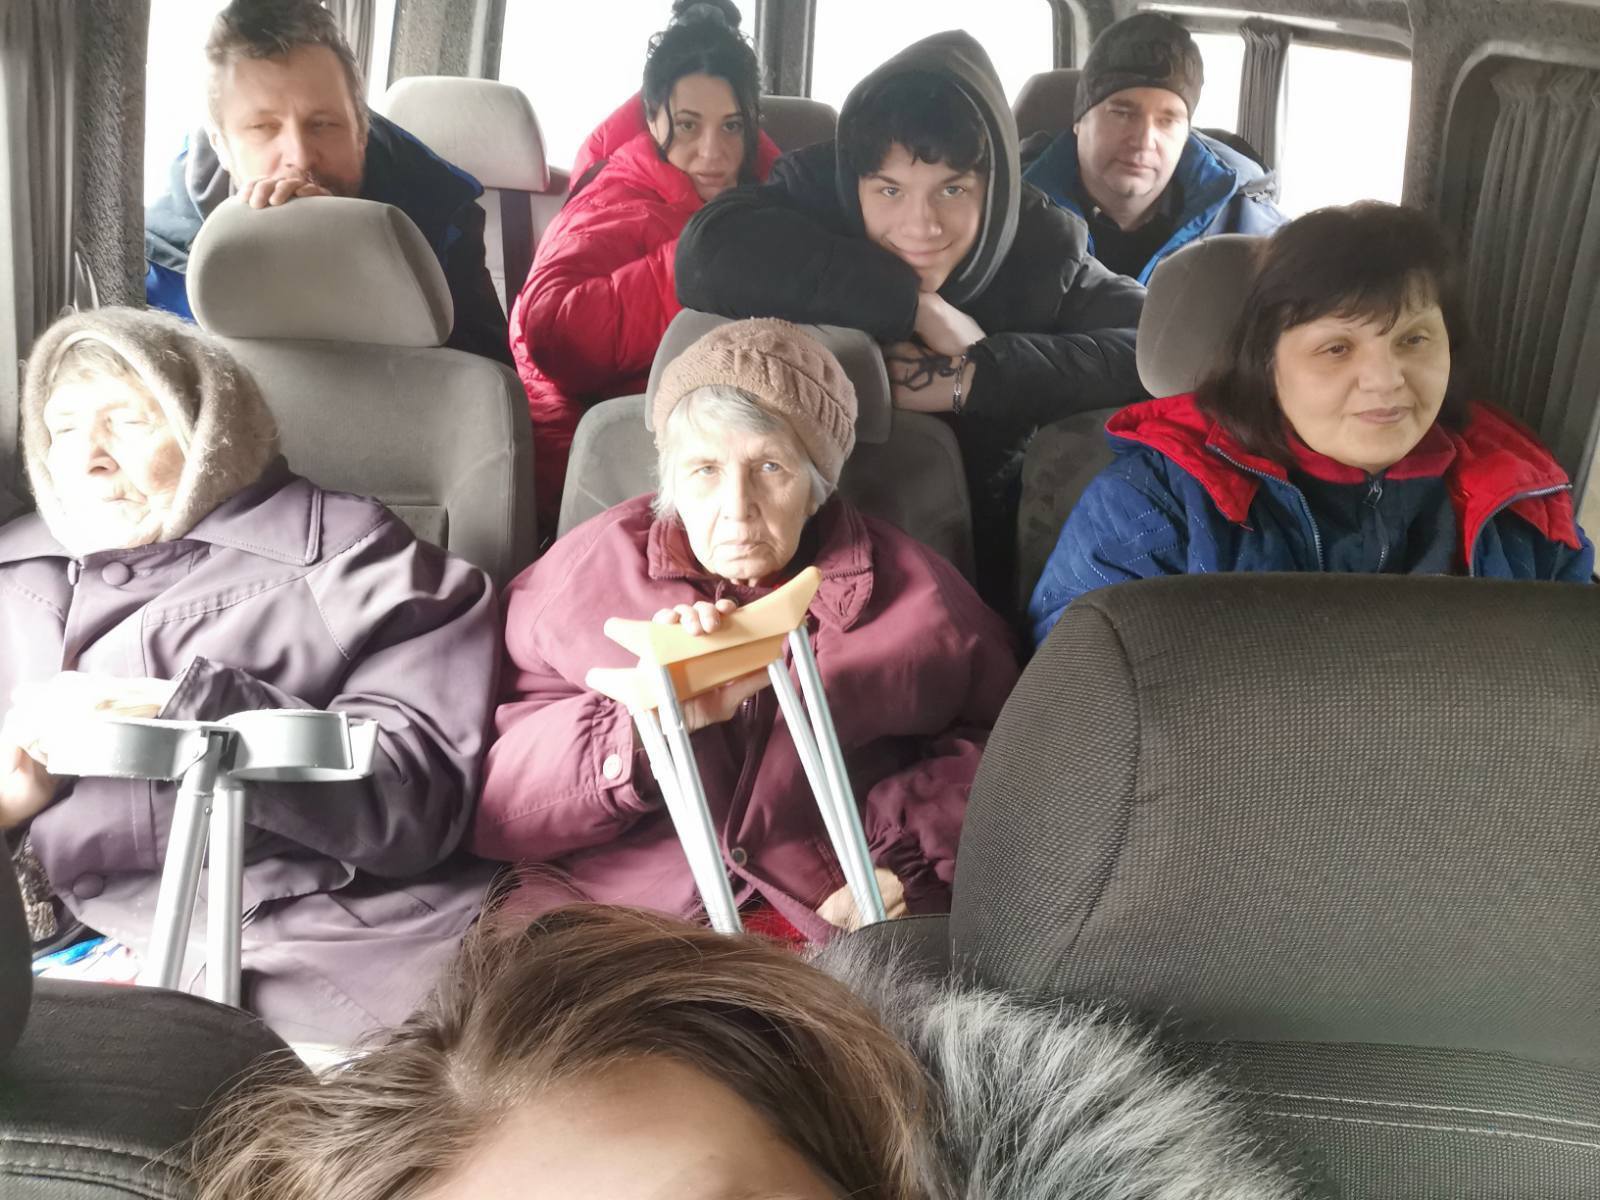 A group of people in winter clothes sit in a van